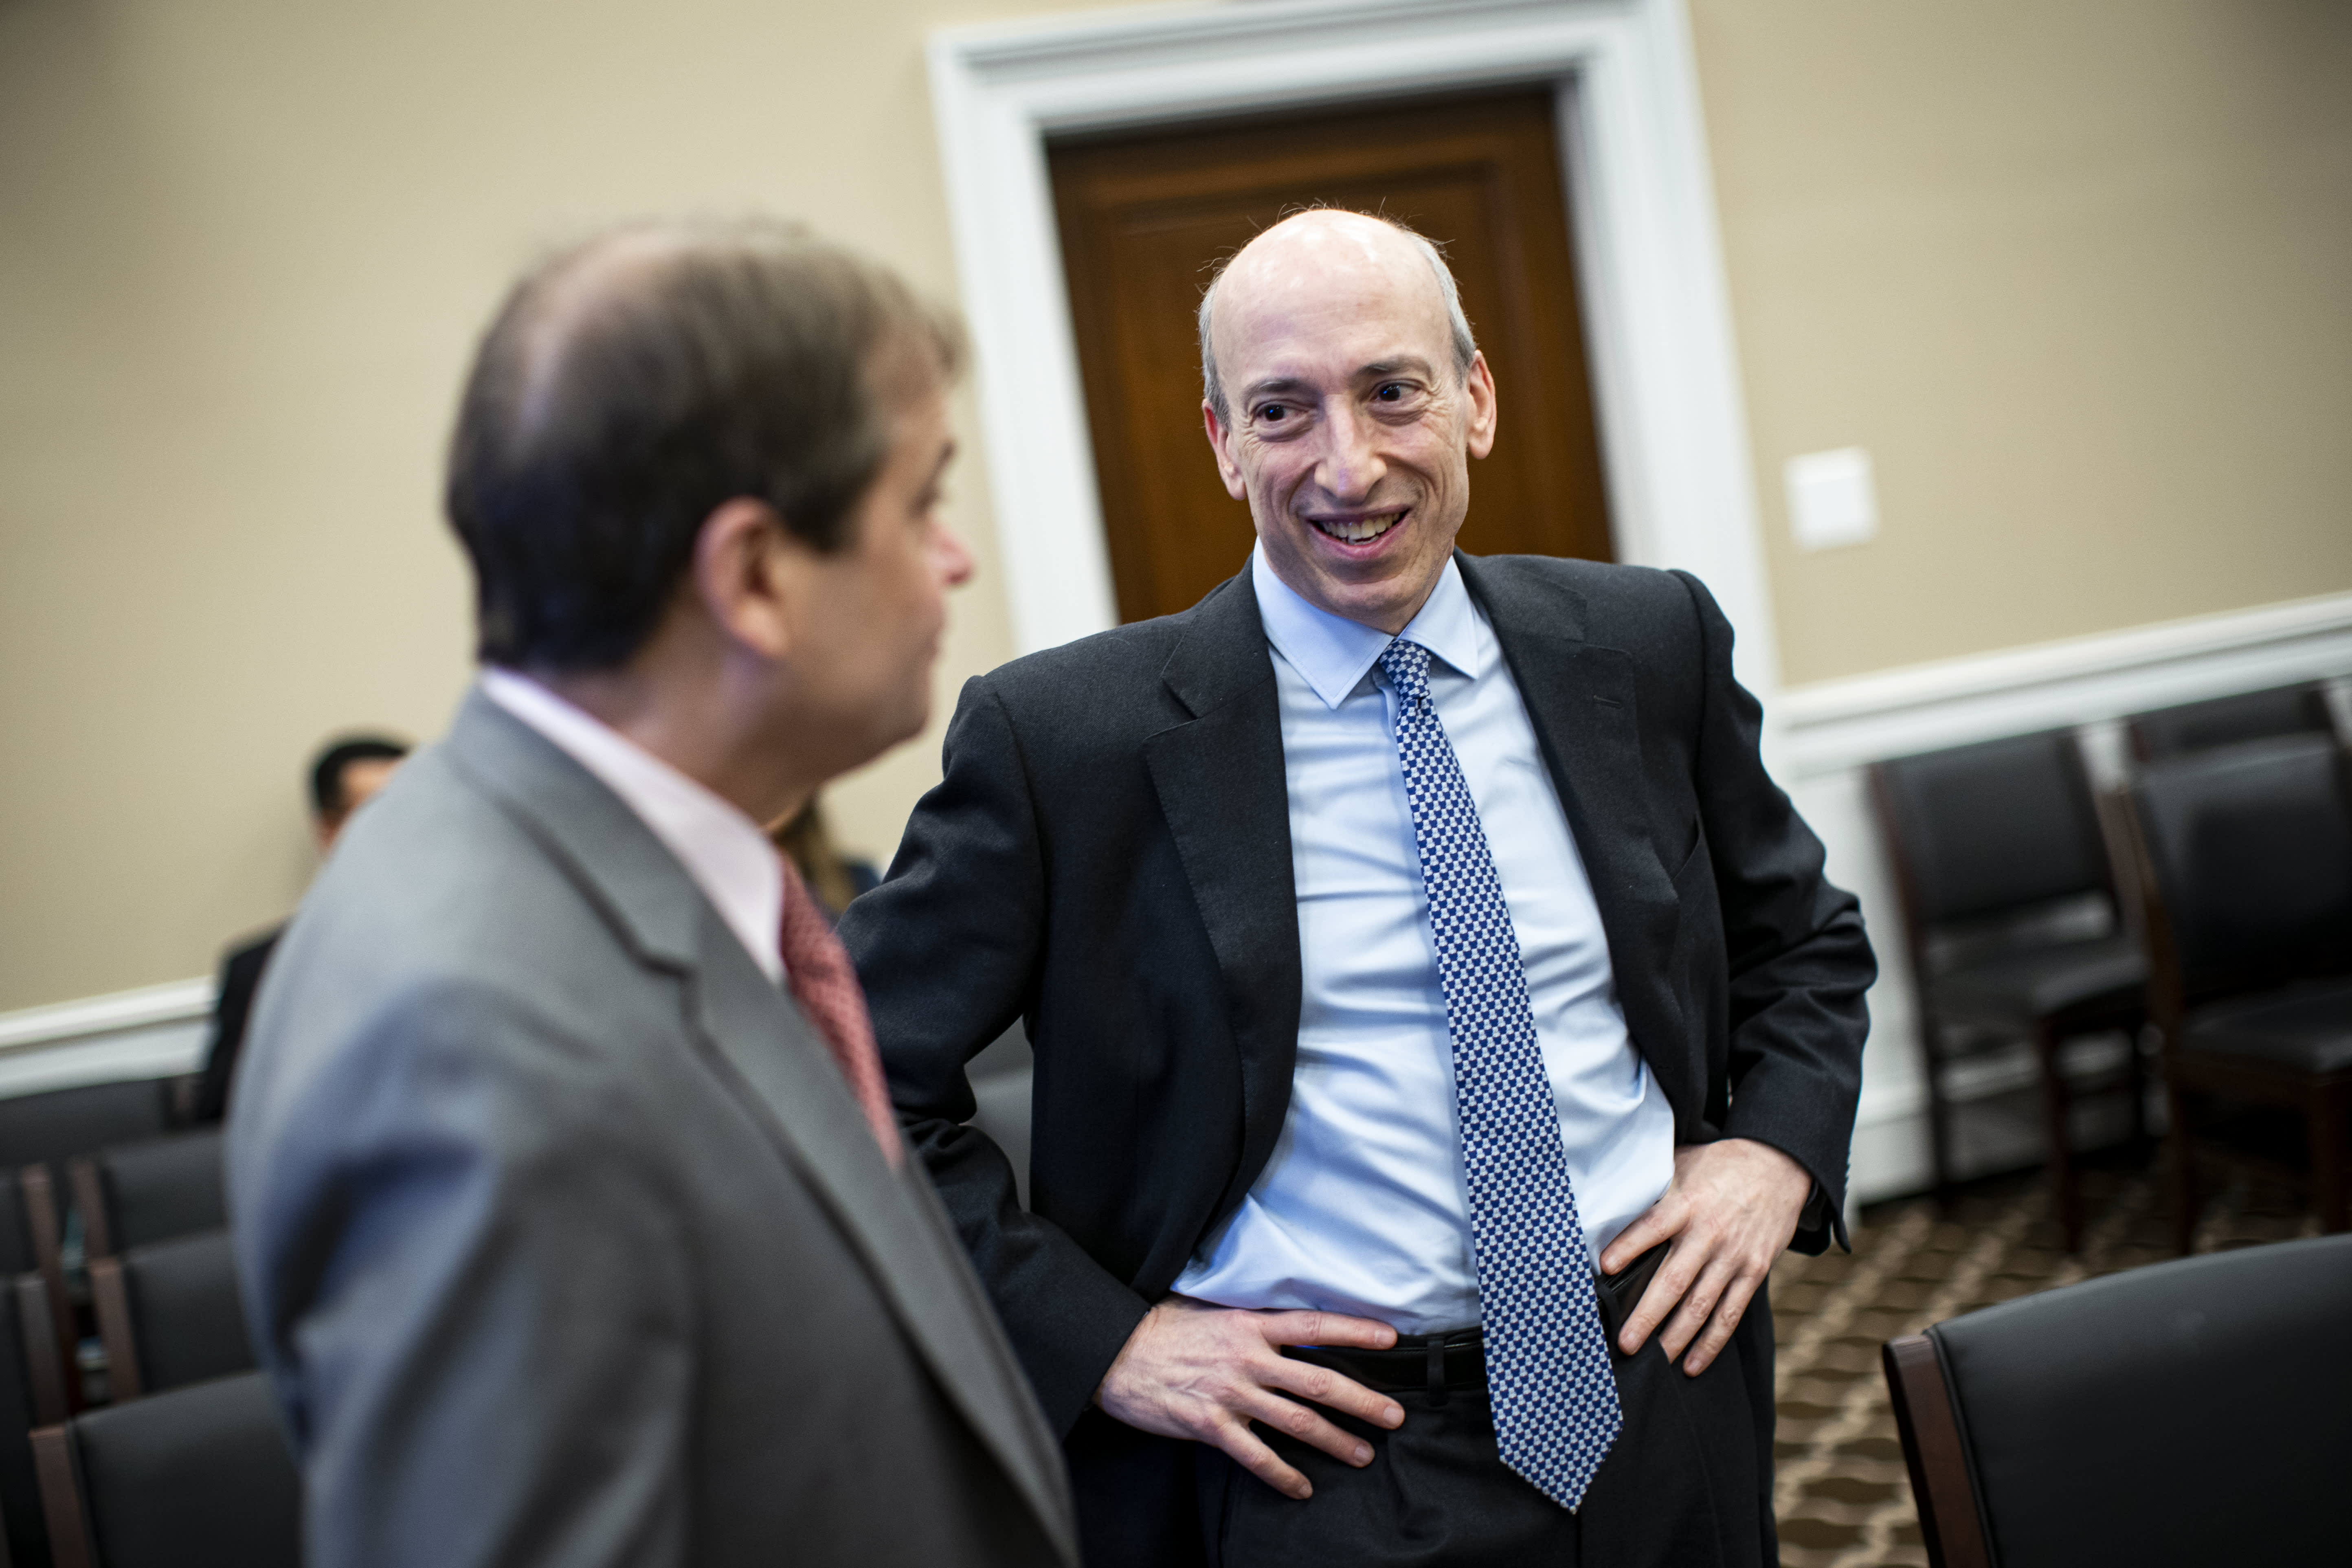 SEC Chairman Gary Gensler makes changes to how the stock market operates